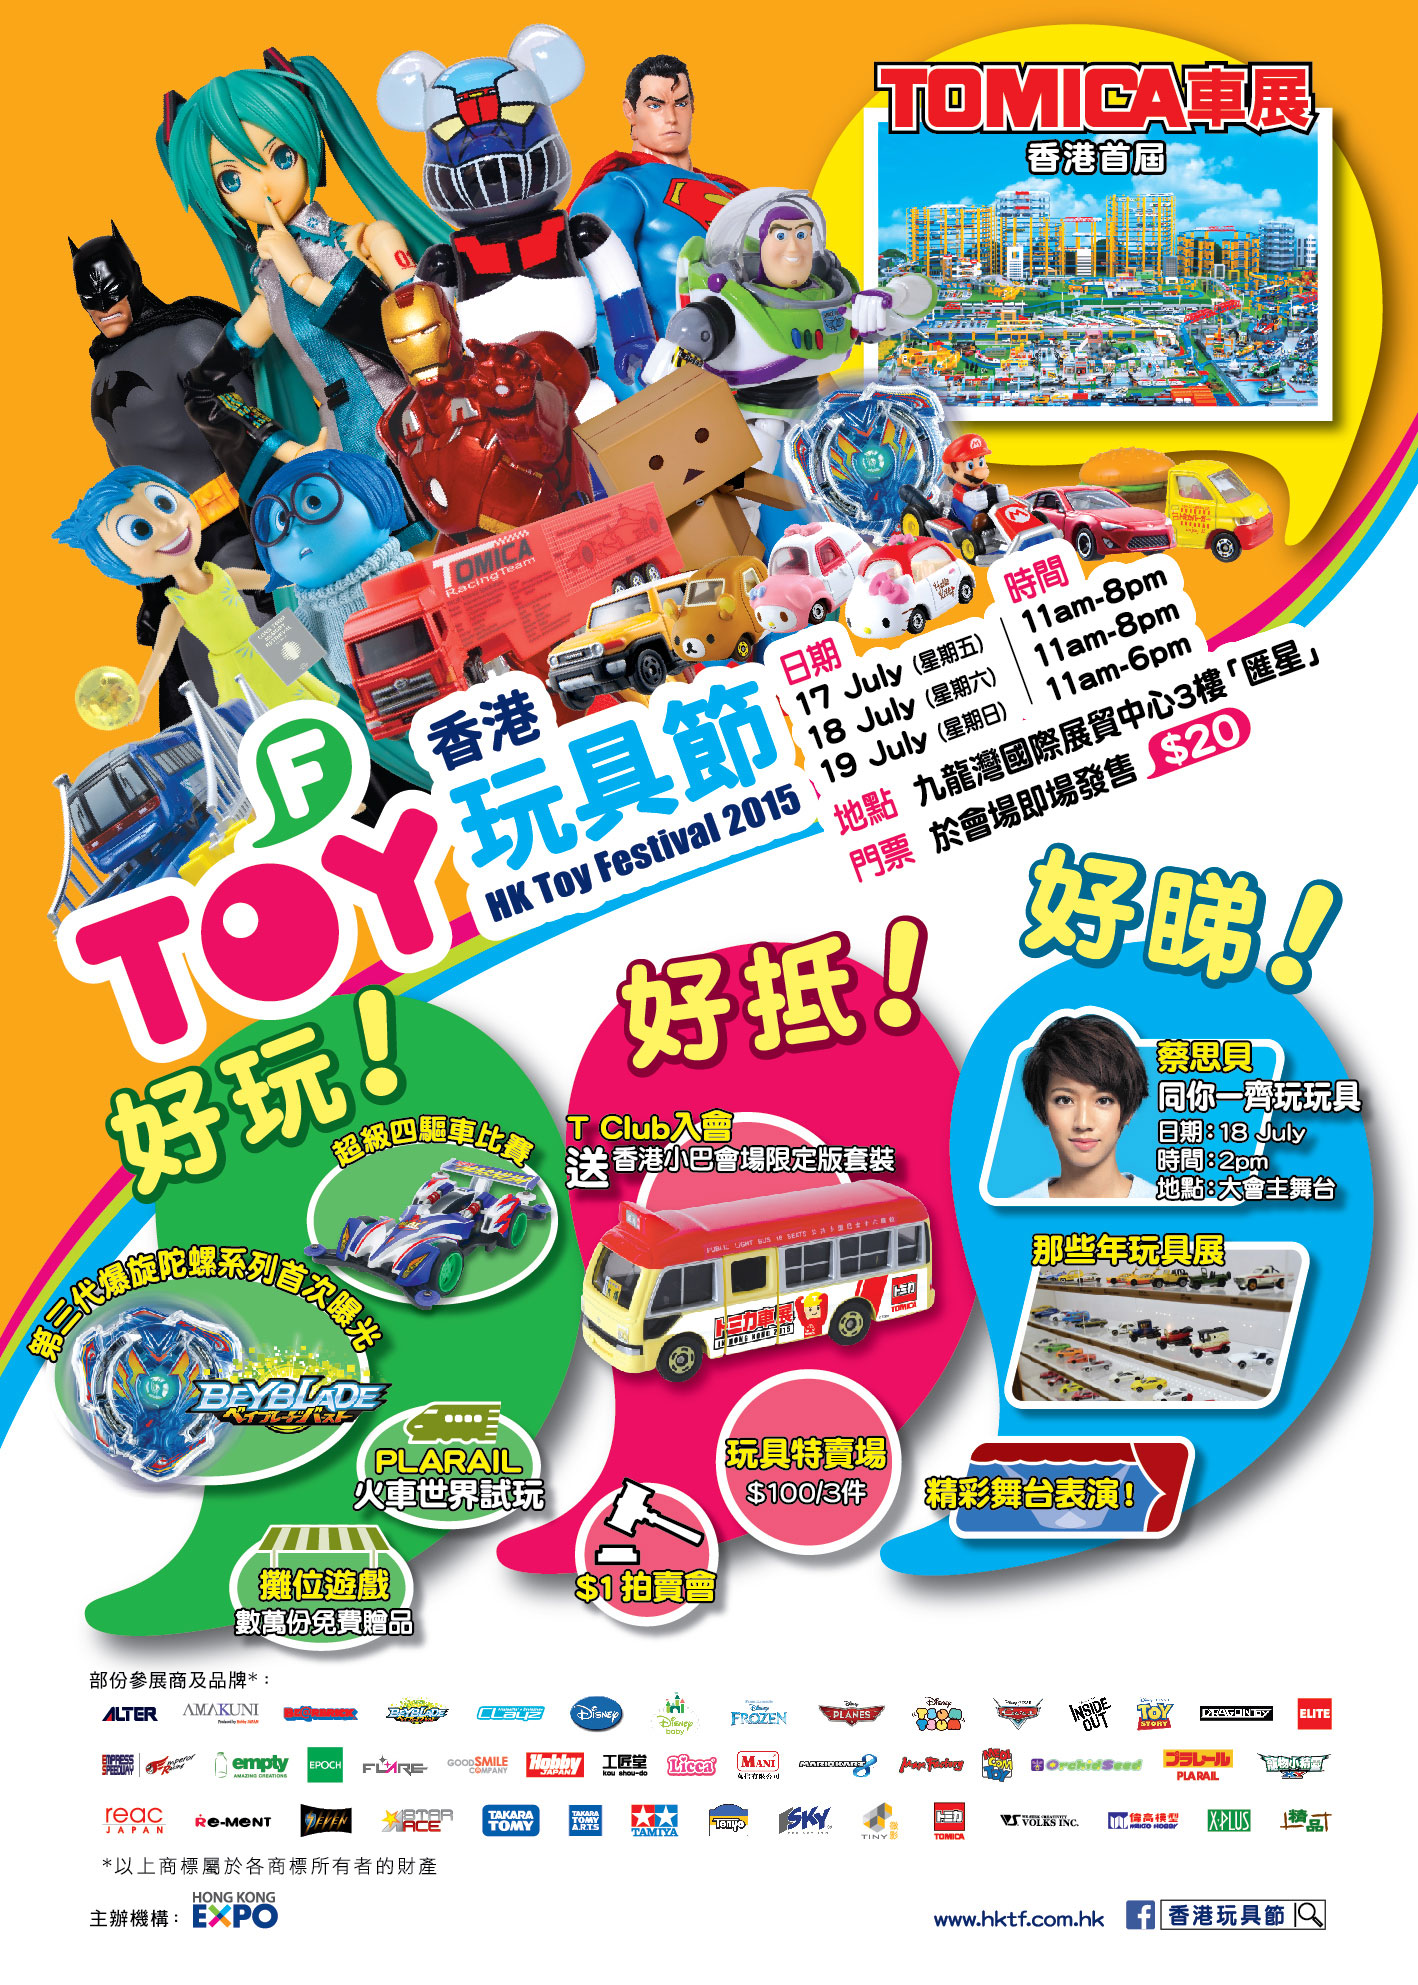 Hong Kong Toys Festival 2015 Ultra-popular Activities and Toys